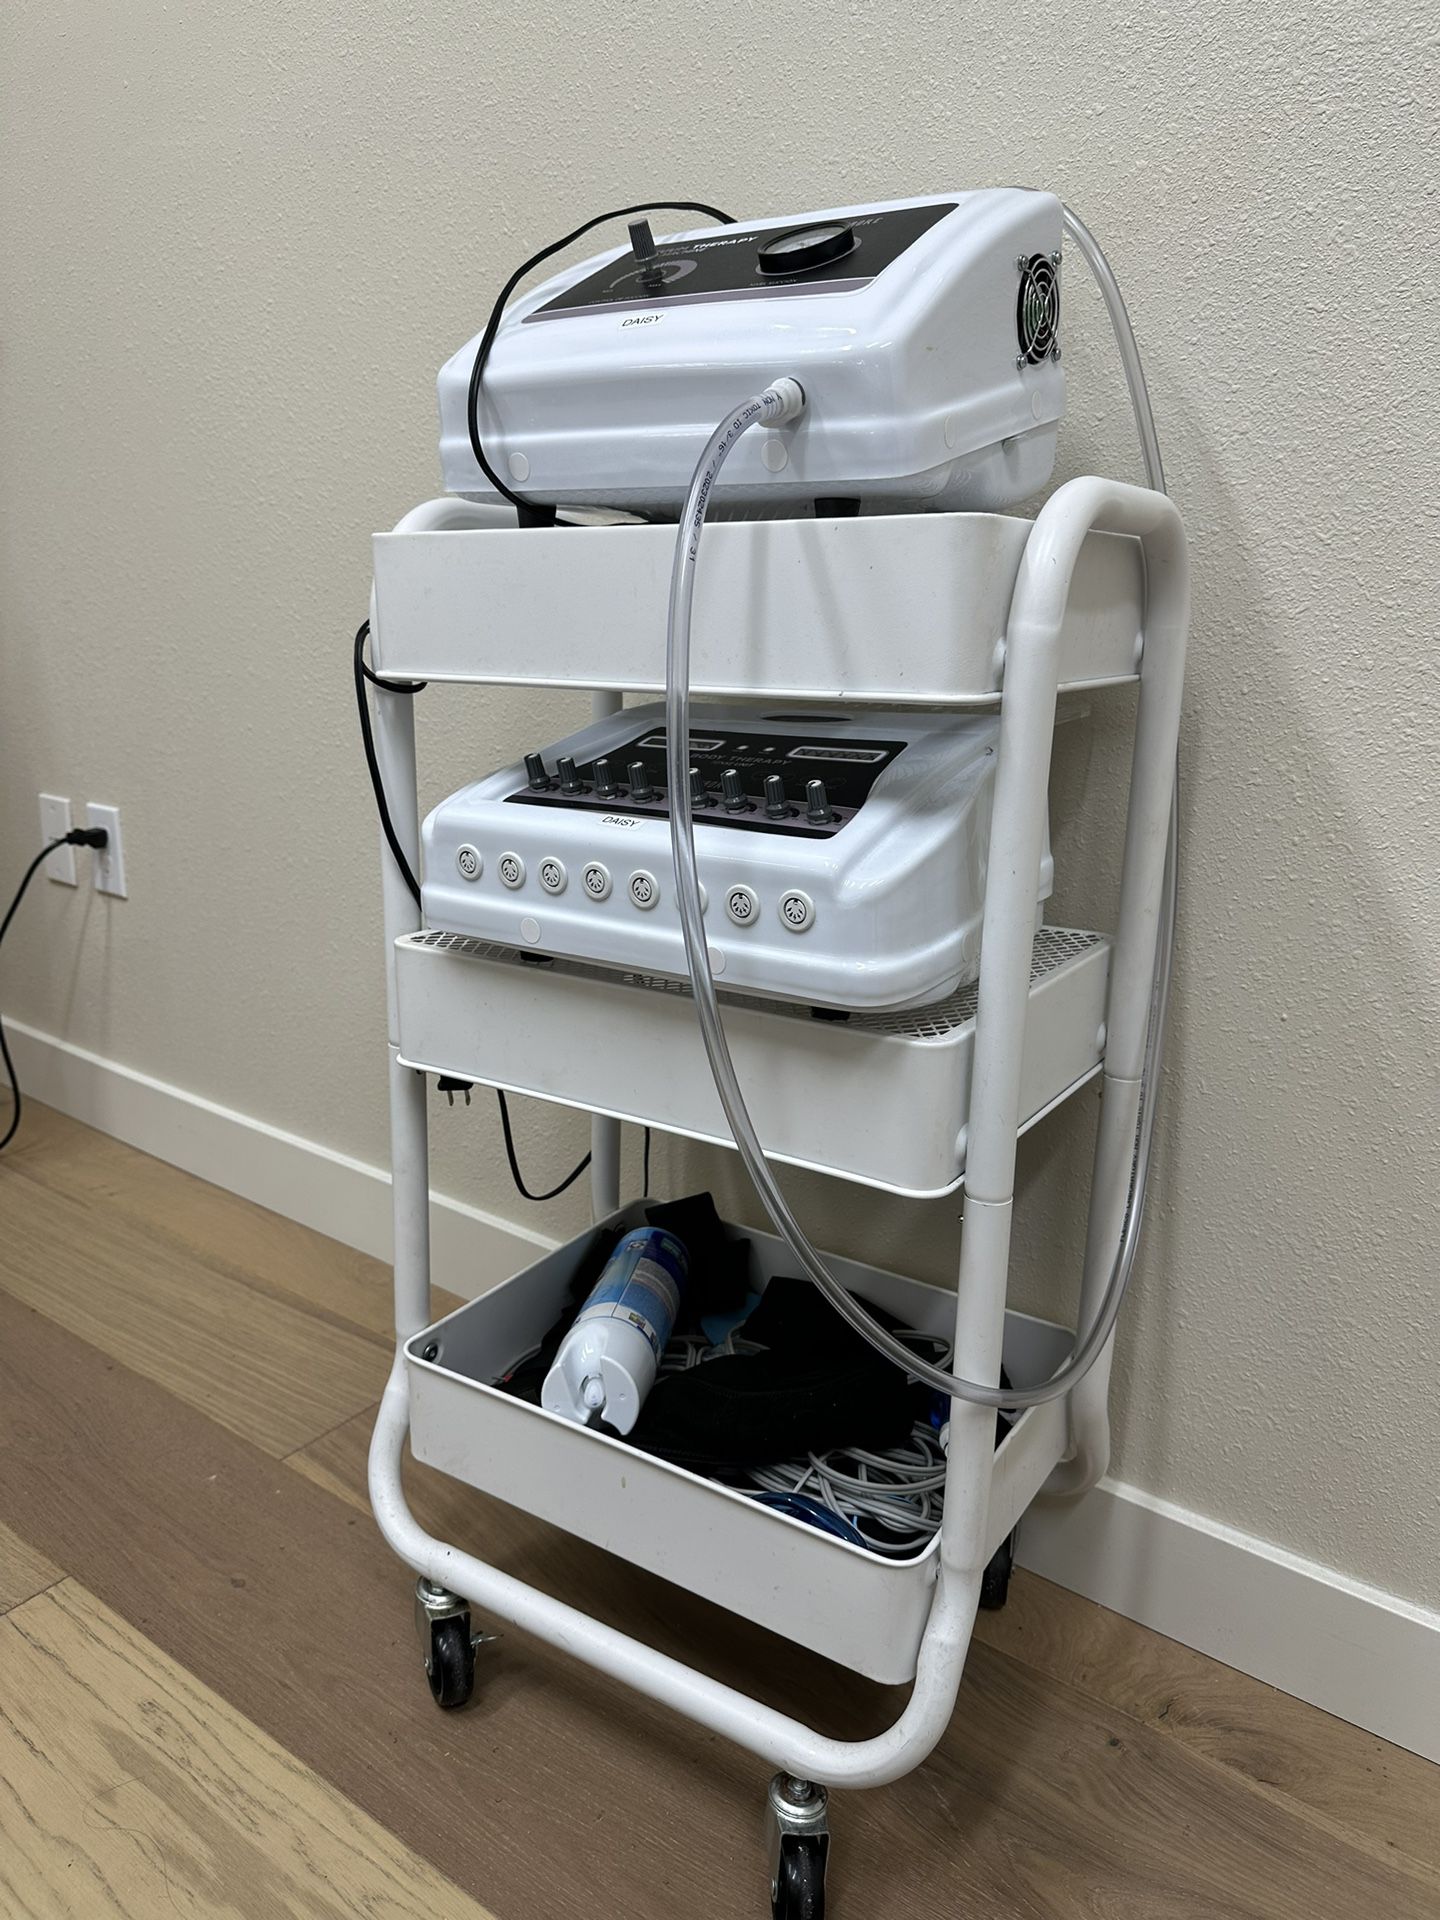 3 White Utility Cart For Beauty!